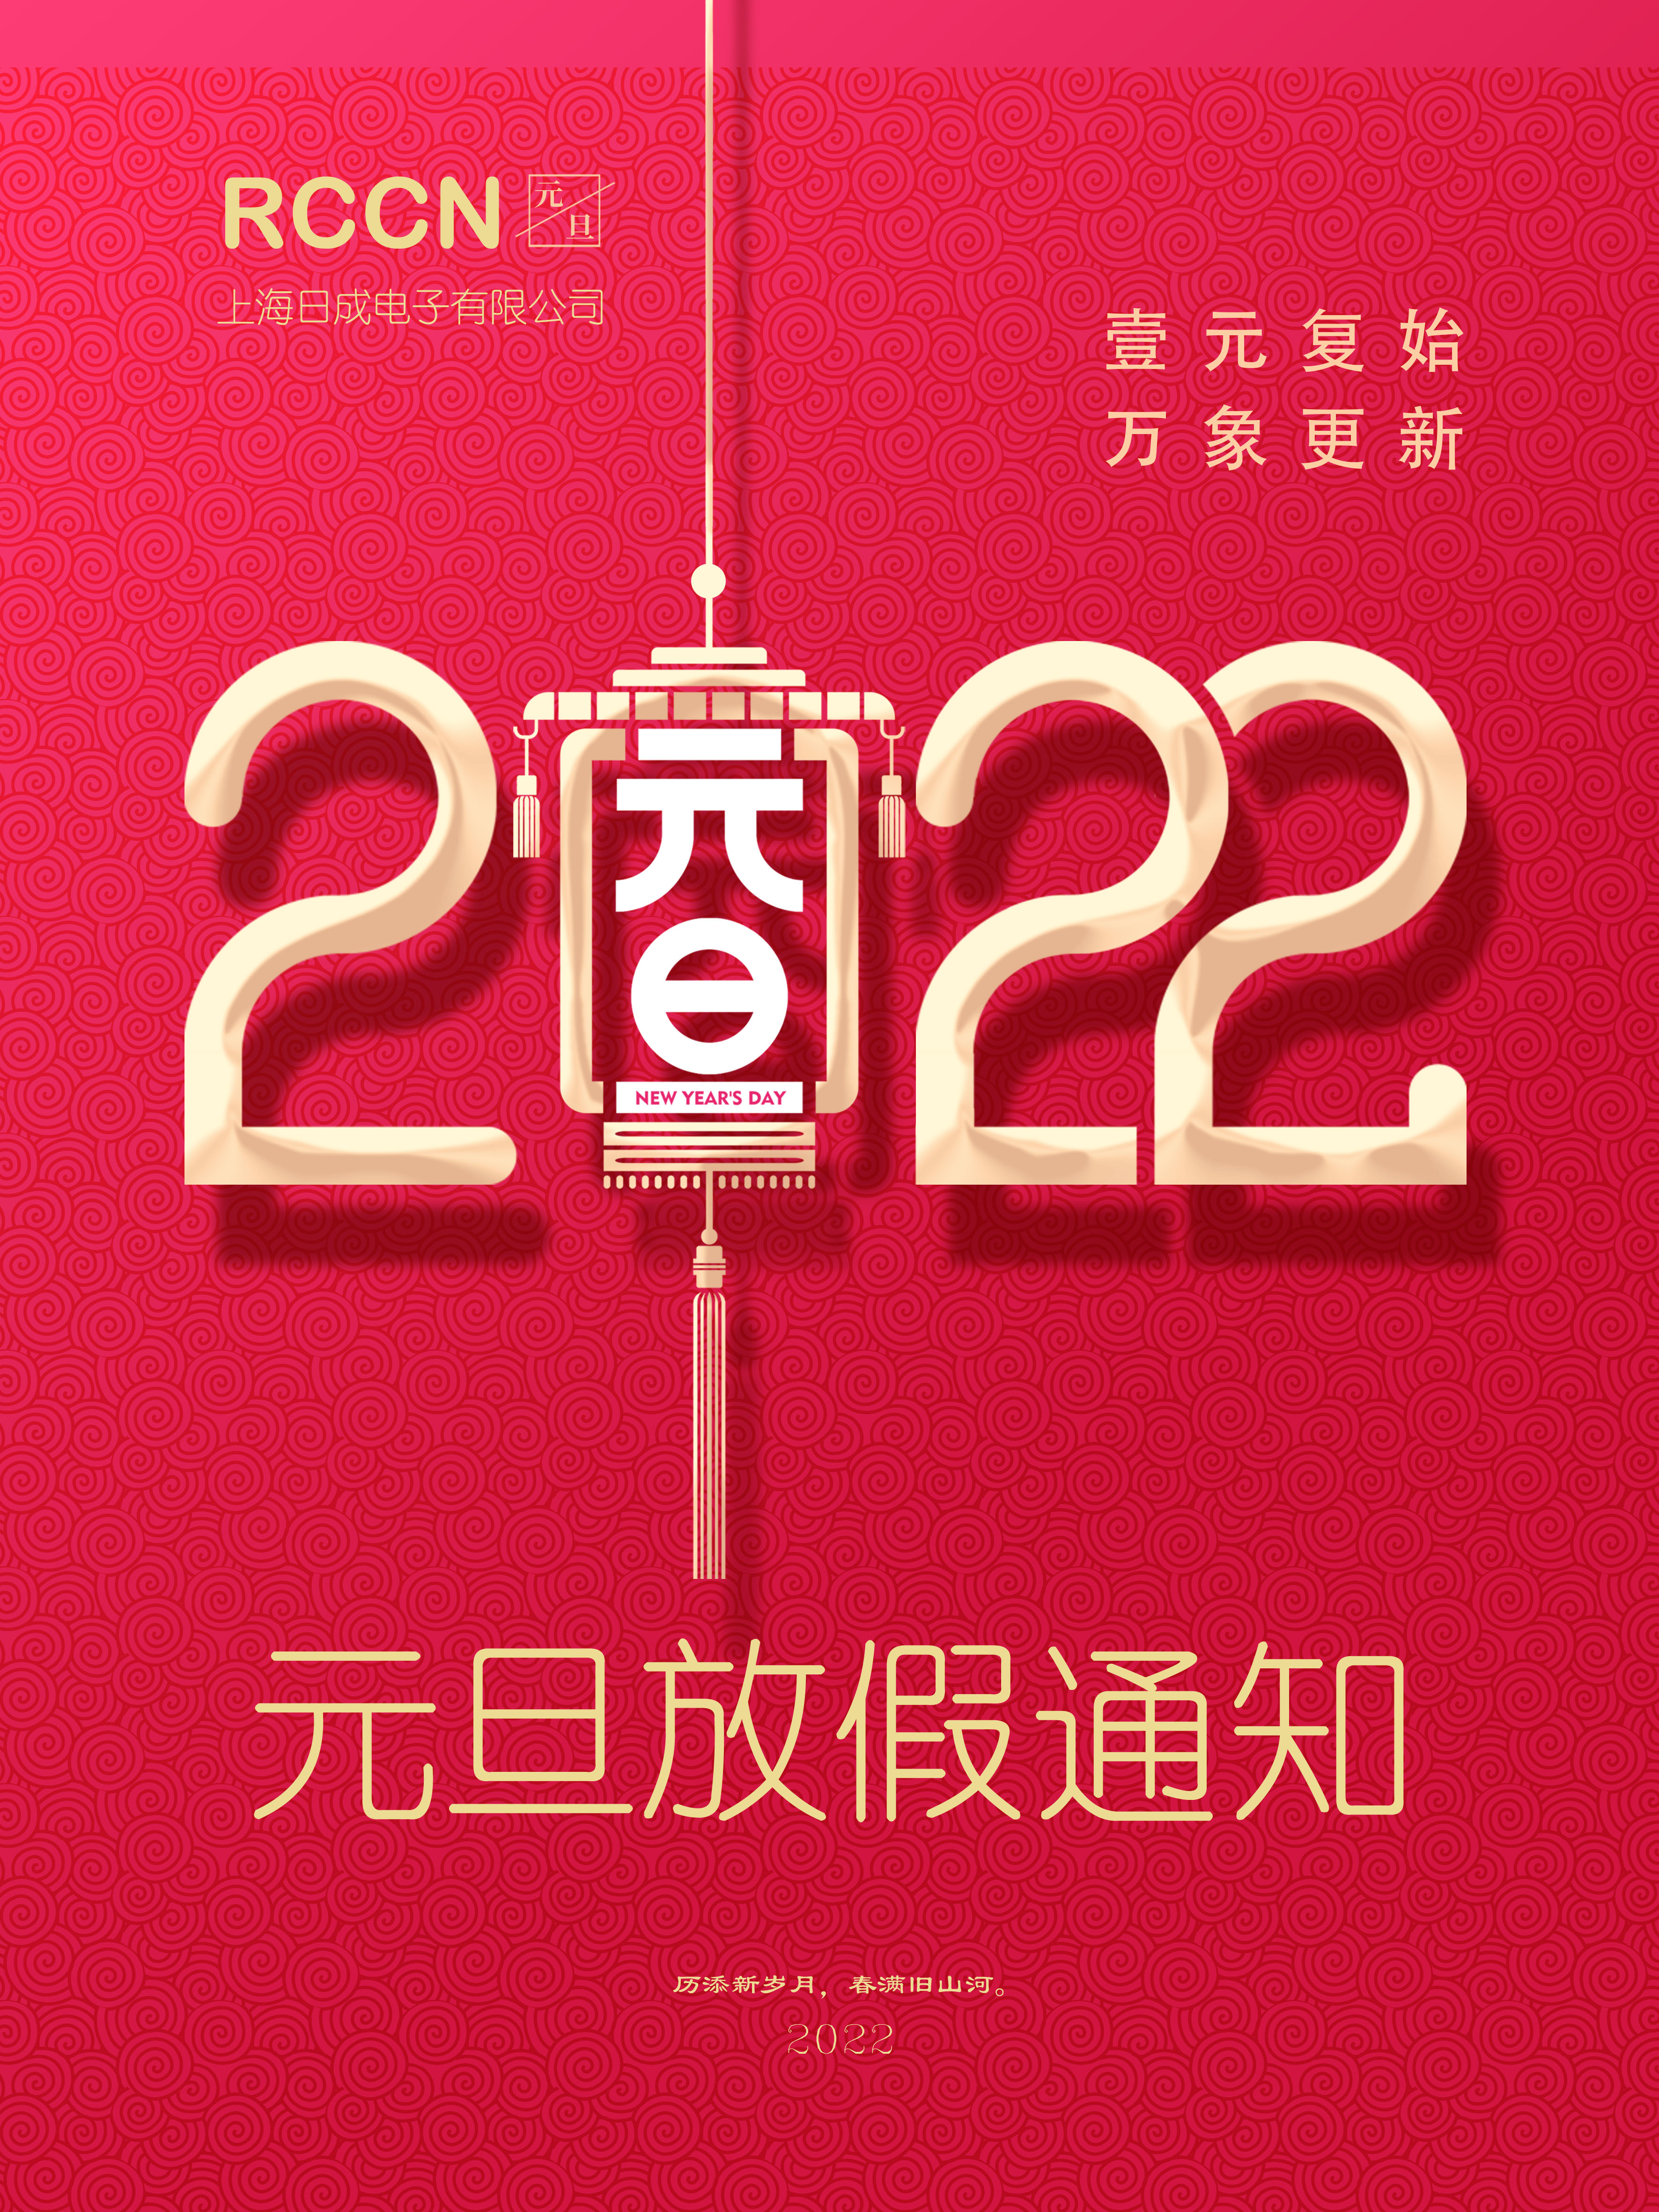 Holiday Notice About Shanghai Richeng Electronics Co., Ltd.  for  New Year's Day in 2022